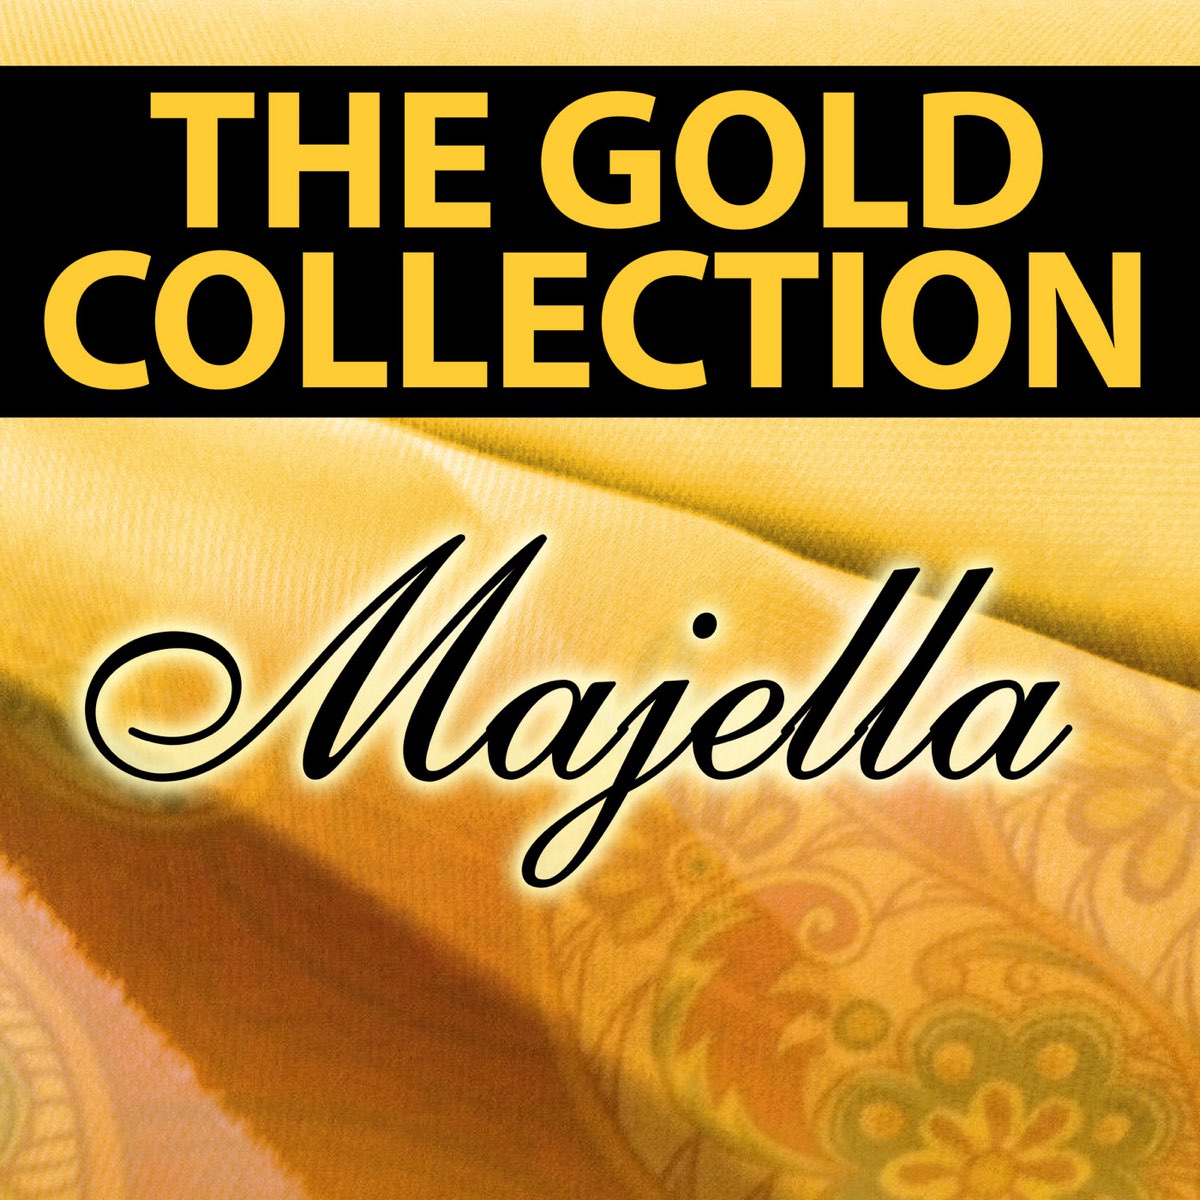 Gold collection. Майелла. Golden collection. Golden collection Music. Слушать лучшие золотые сборники